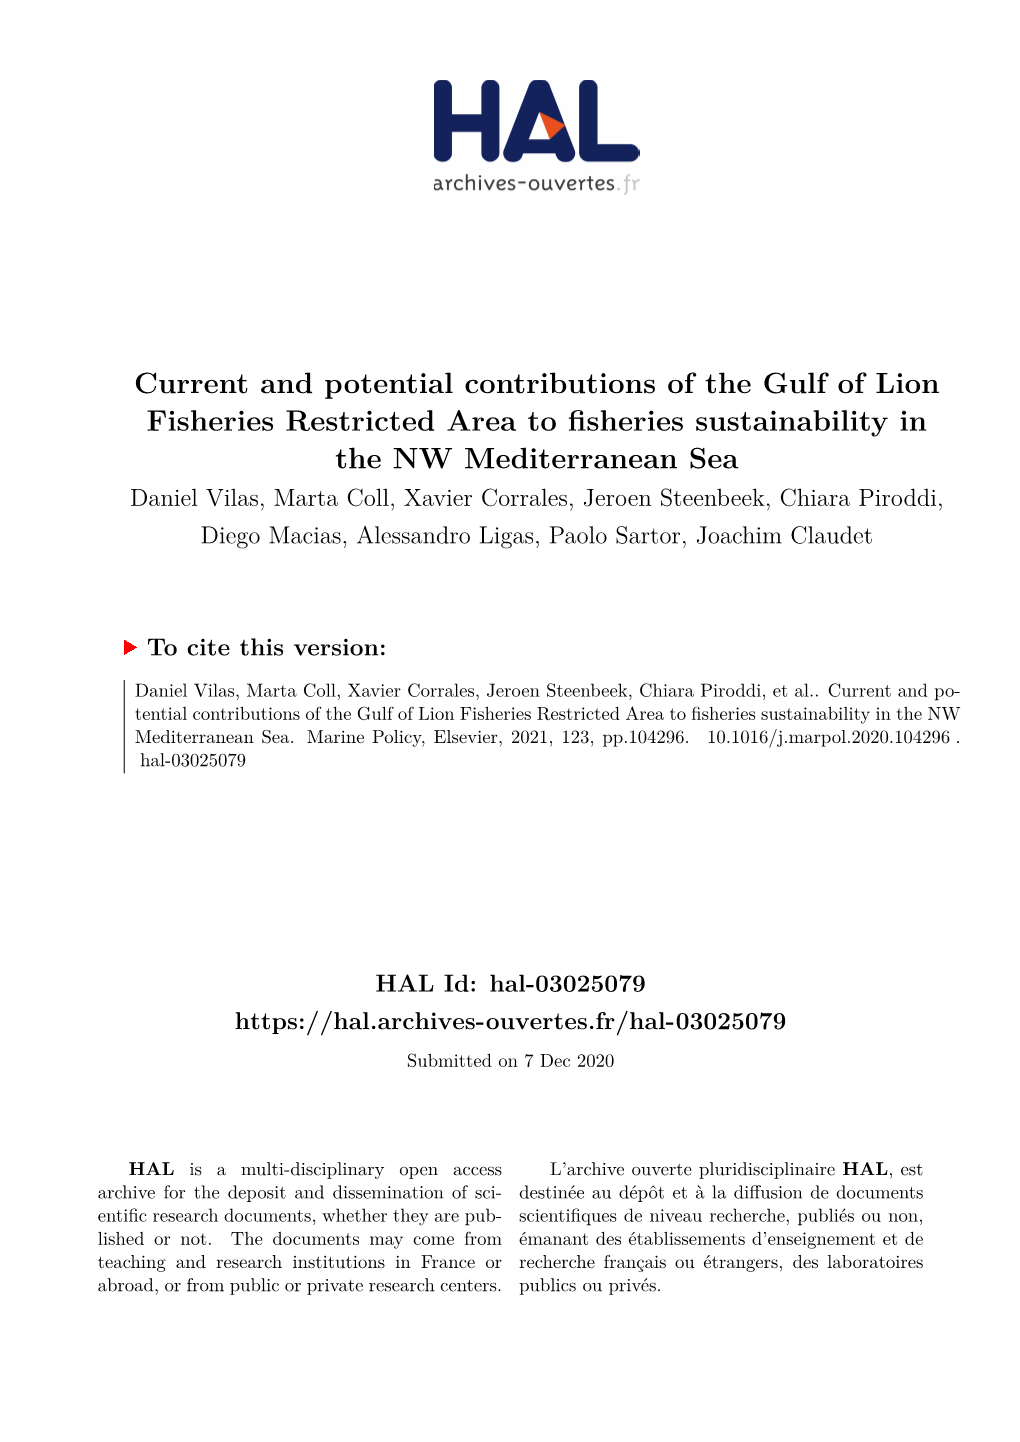 Current and Potential Contributions of the Gulf of Lion Fisheries Restricted